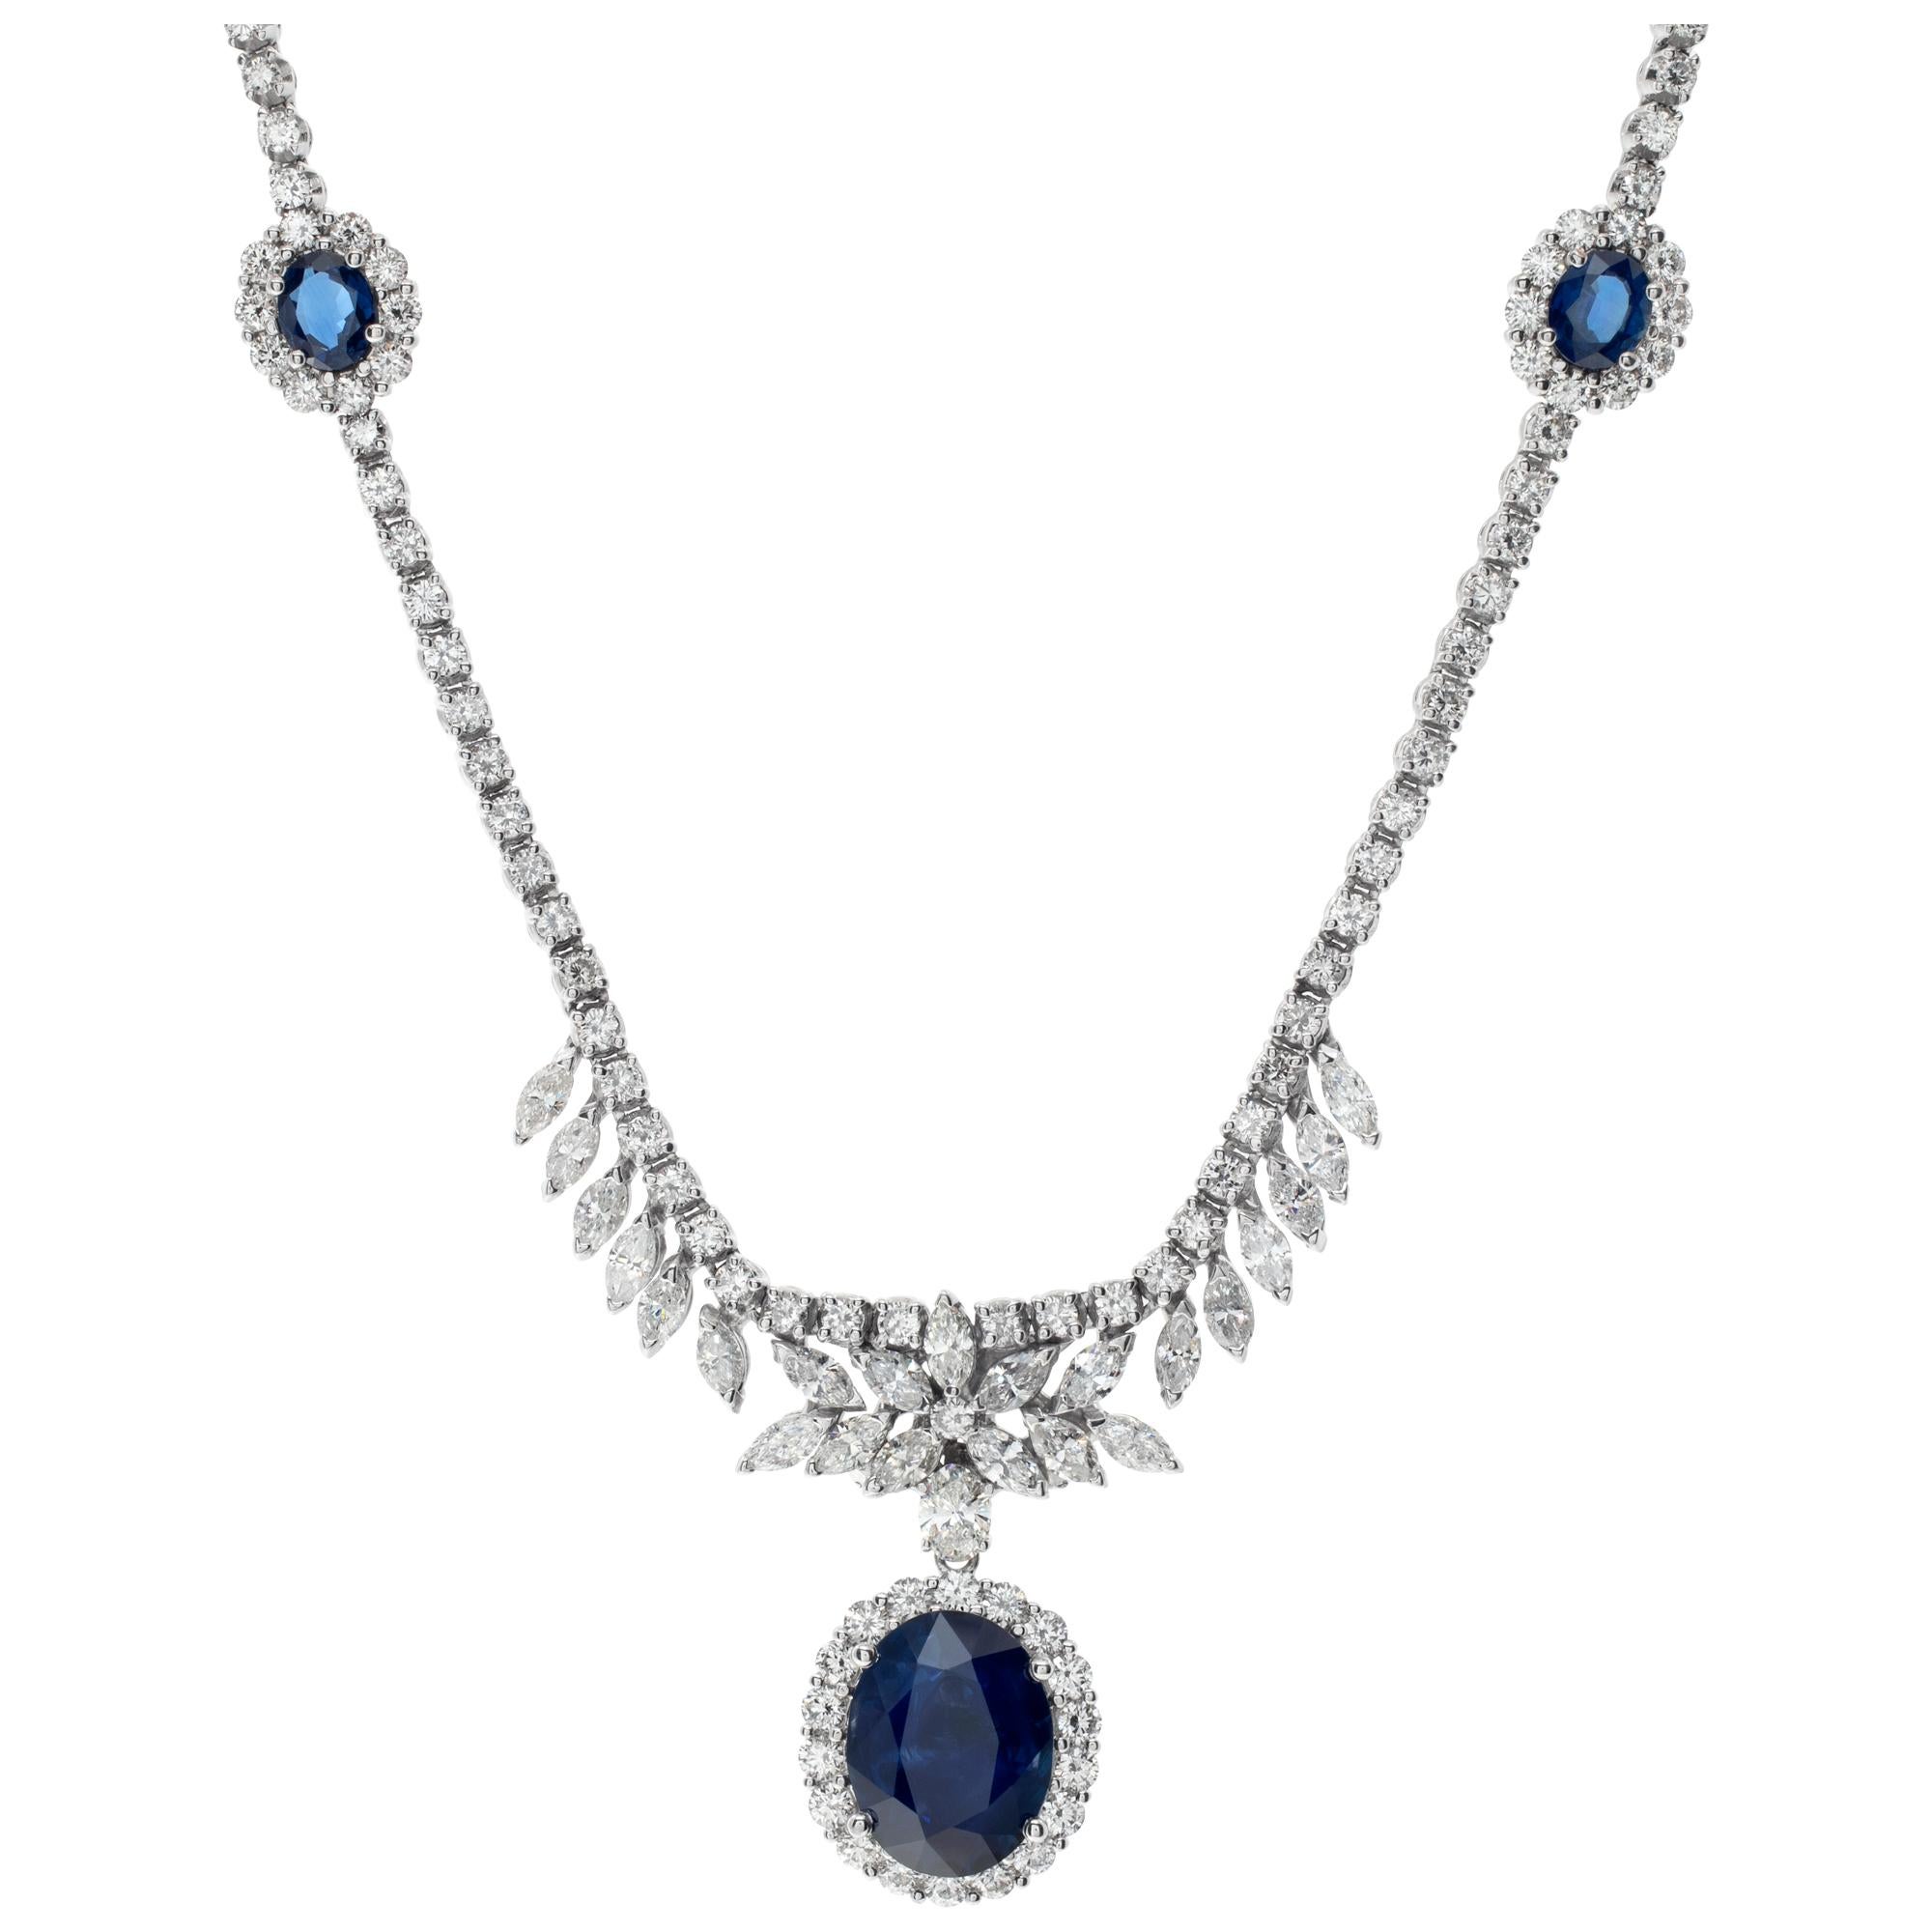 White gold necklace w/ round marquise oval cut diamond & blue oval cut sapphires In Excellent Condition For Sale In Surfside, FL